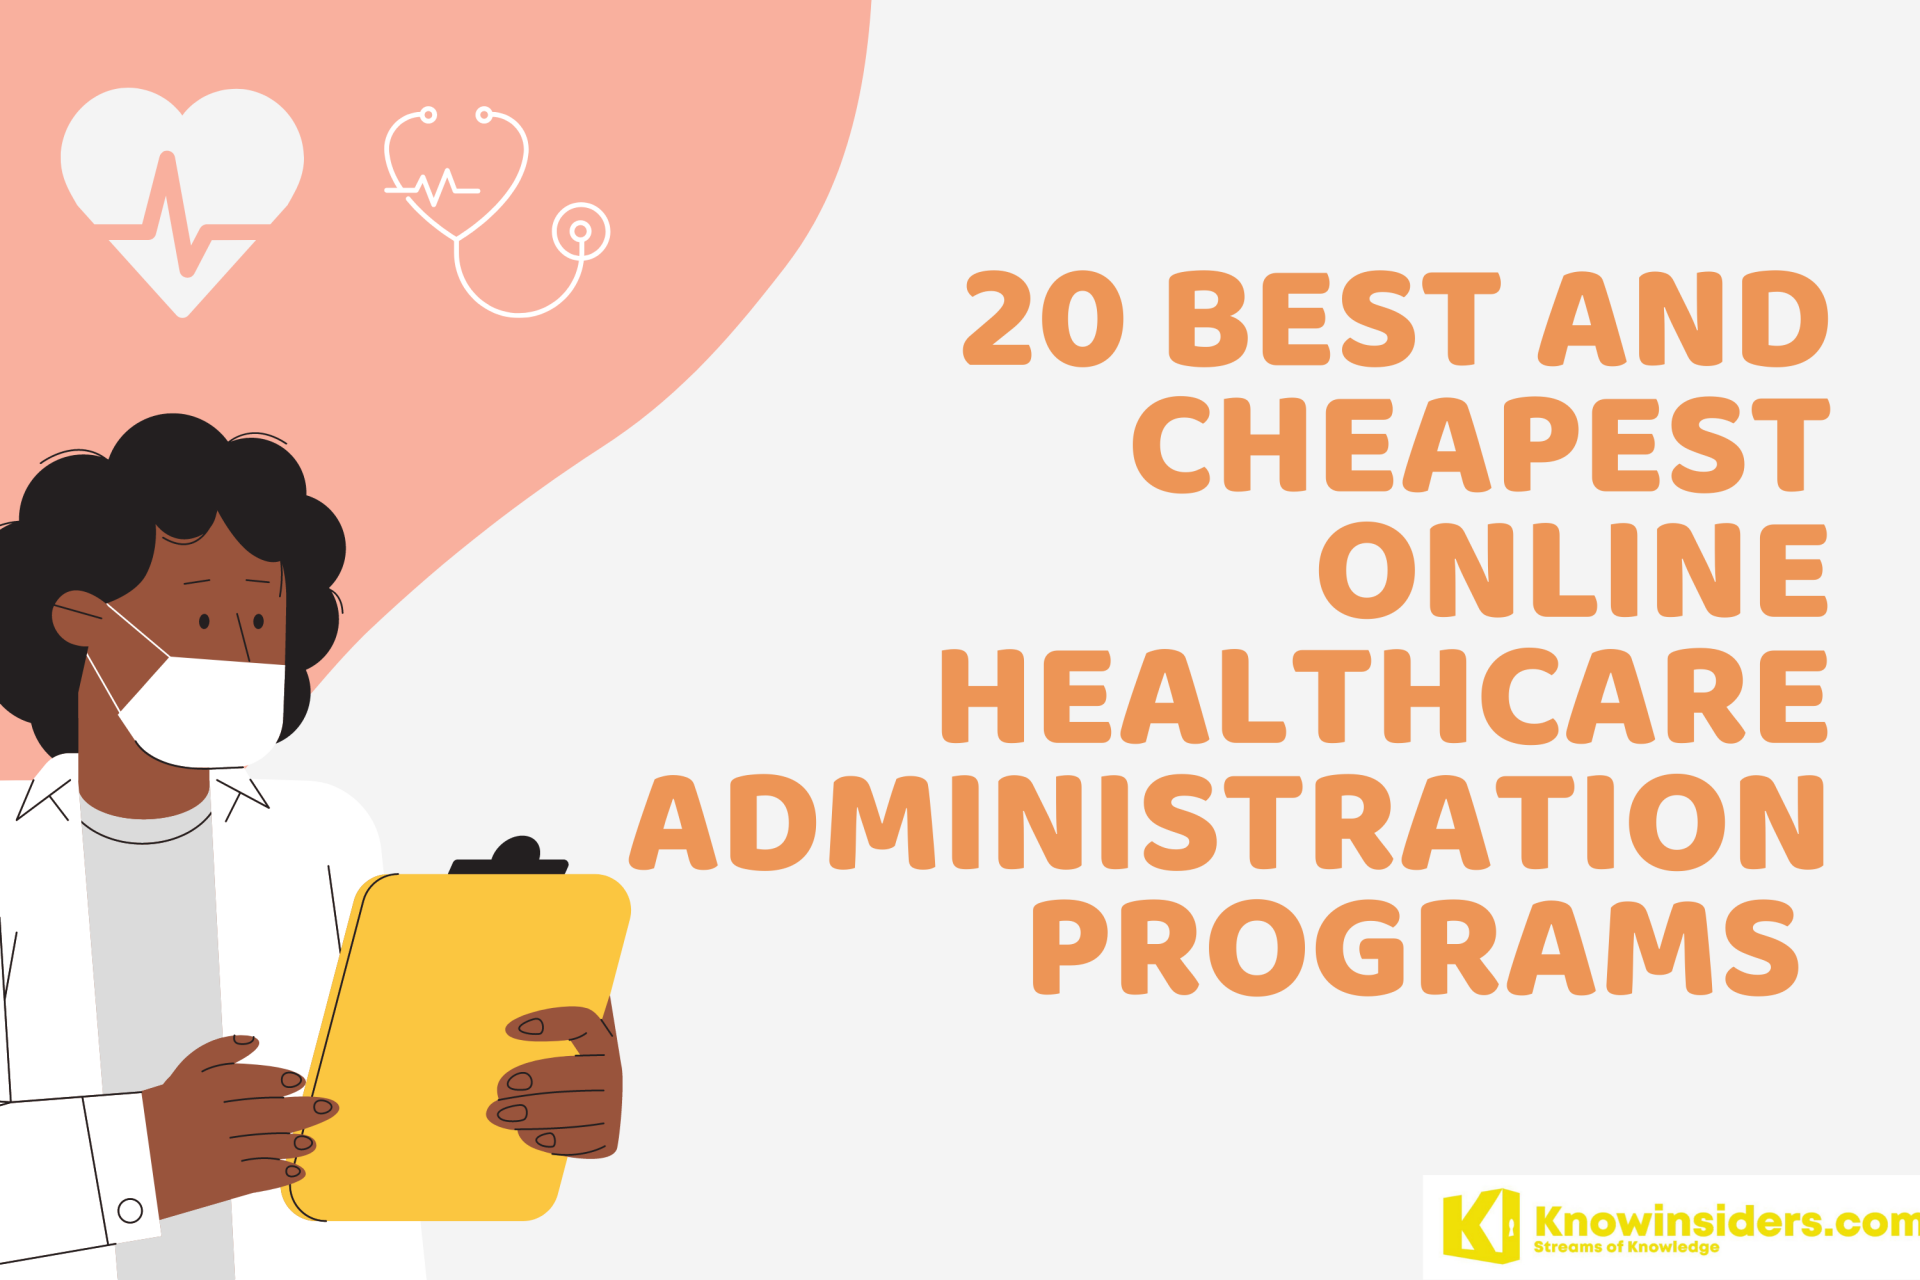 20 Best And Cheapest Online Healthcare Administration Programs 